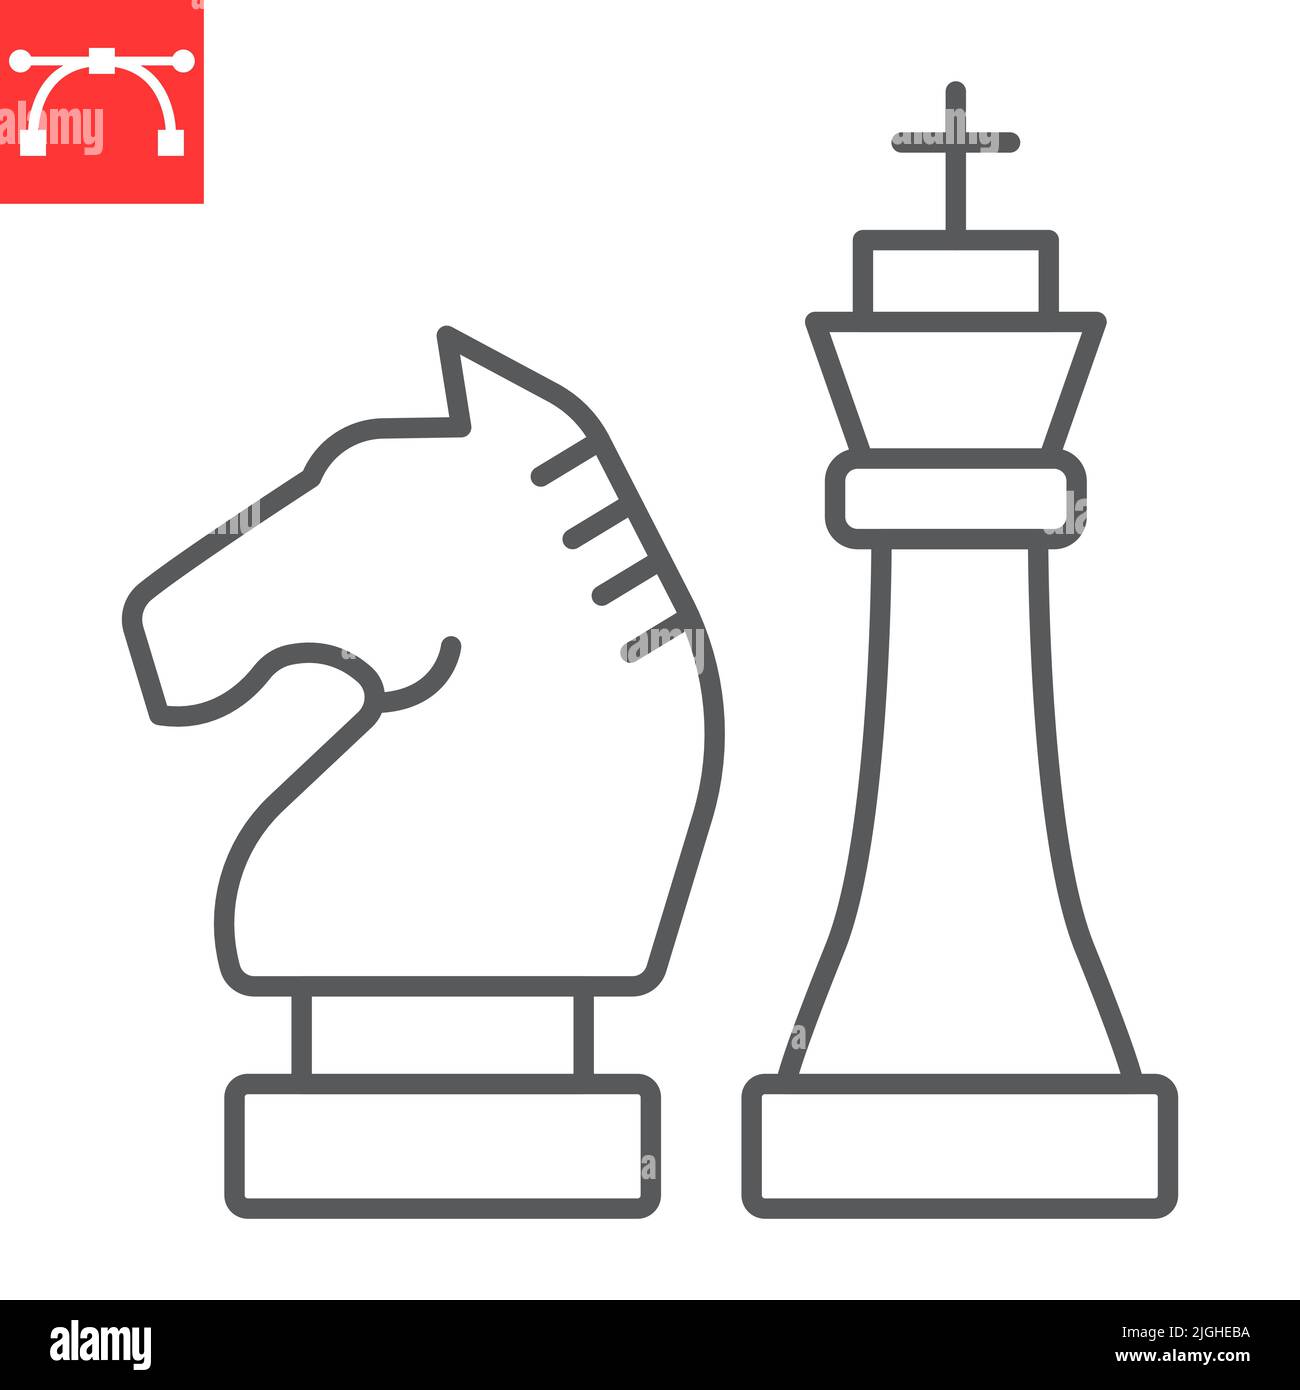 Outlined chess pawn symbol